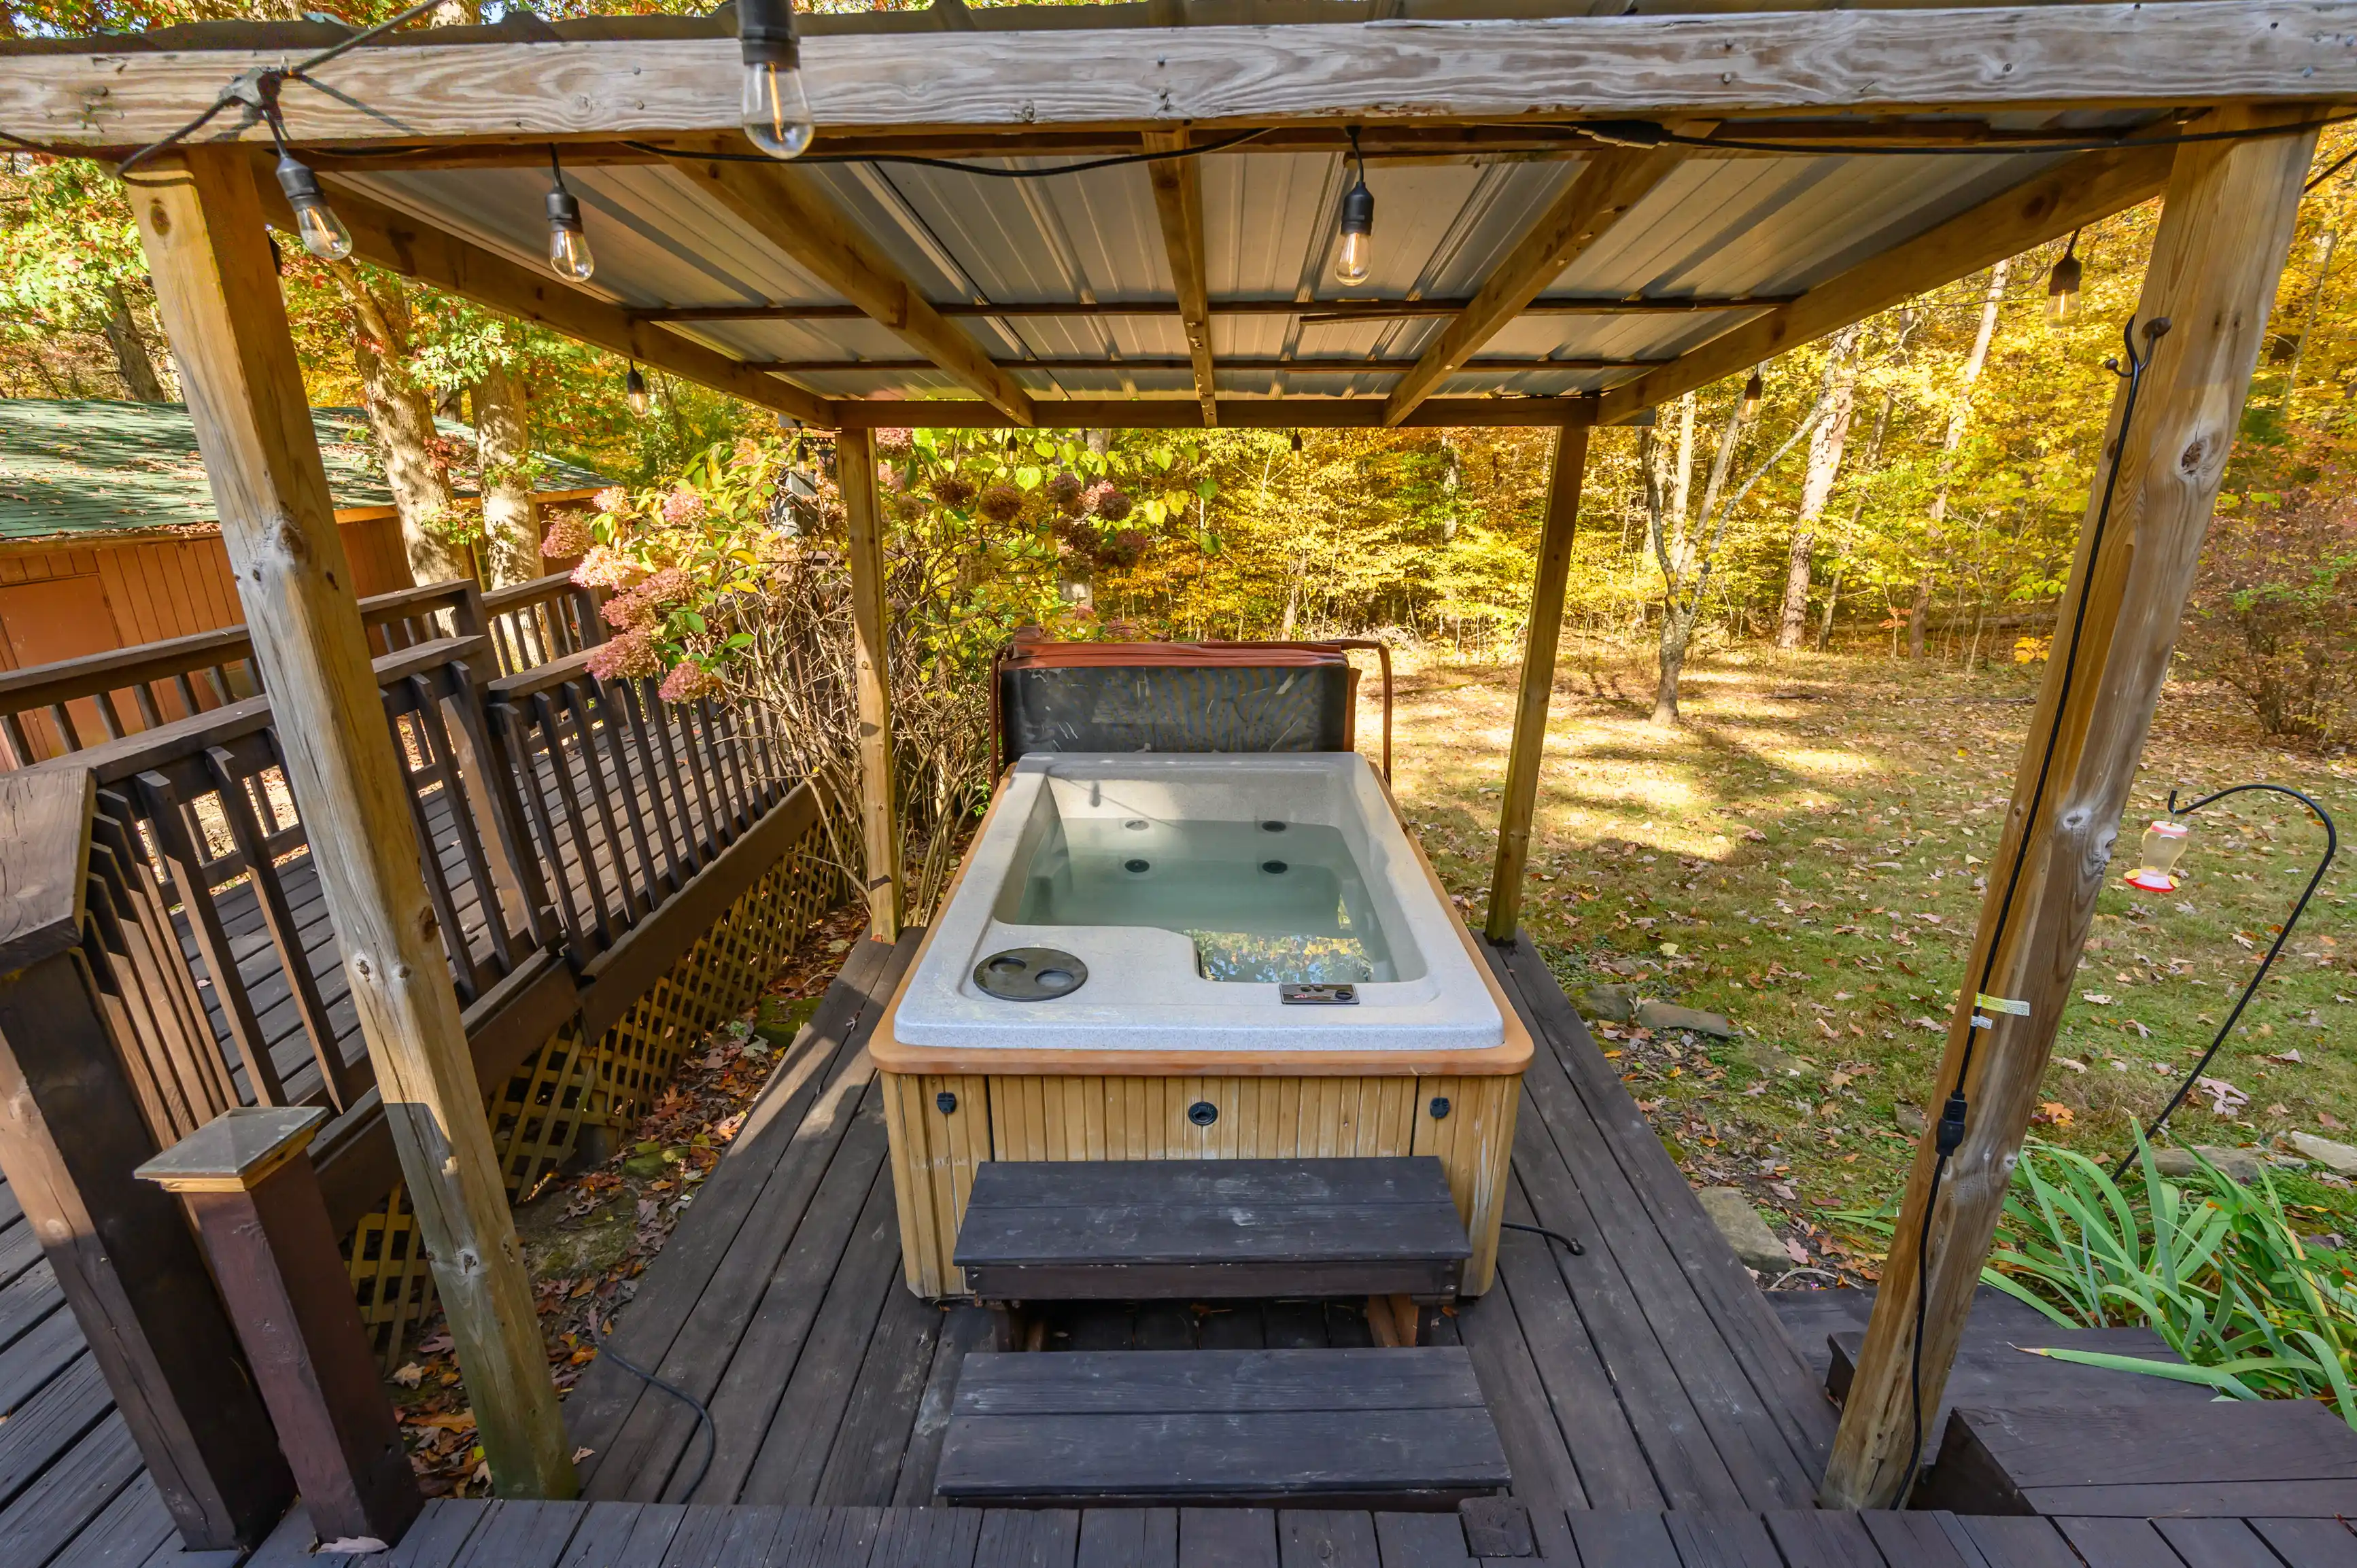 Outdoor jacuzzi under a wooden pergola on a deck surrounded by autumn foliage.